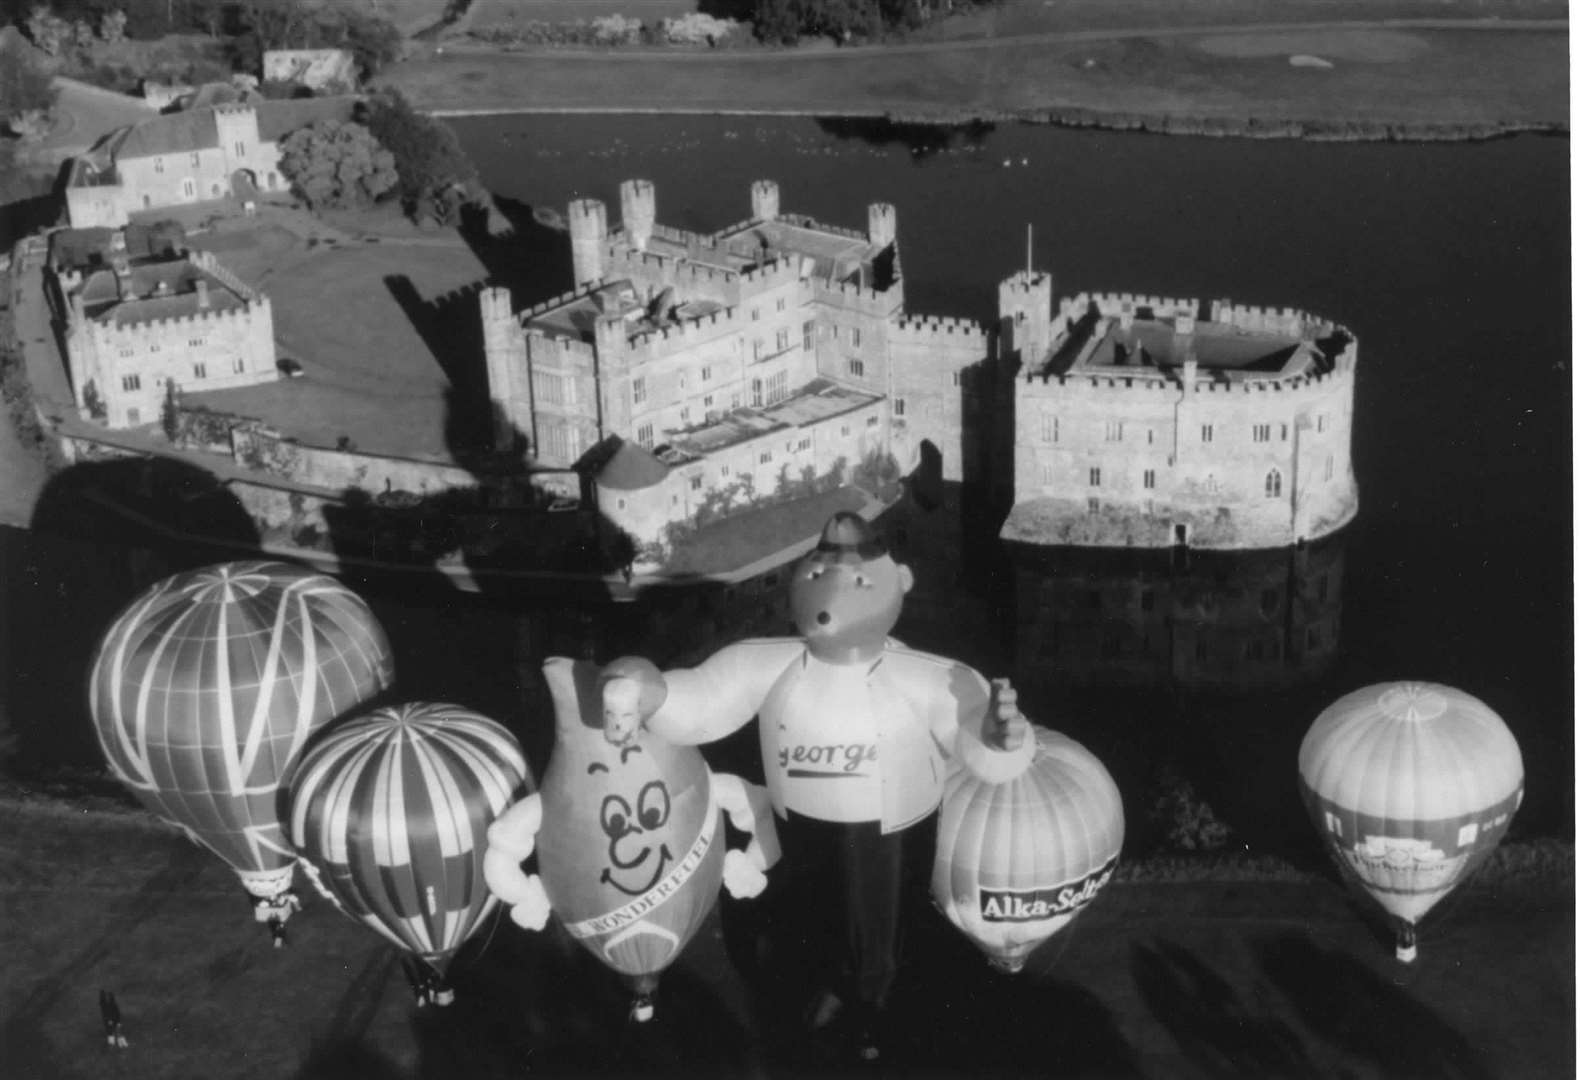 Leeds Castle hasn't changed much since 1988